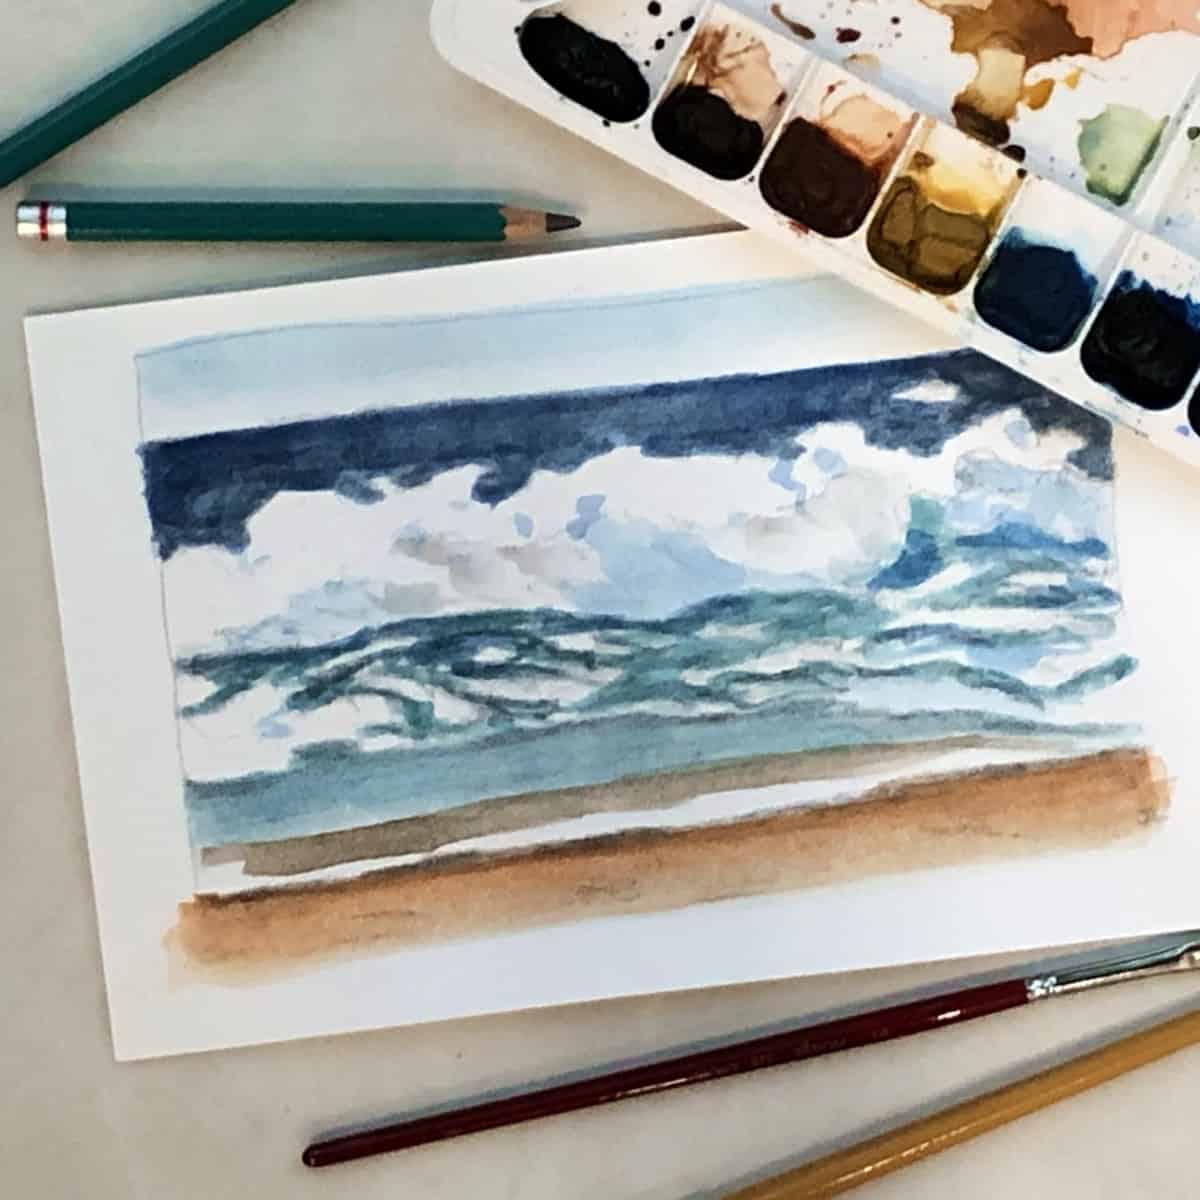 Watercolor painting of a seascape with watercolor paints, paintbrushes, and drawing pencils.